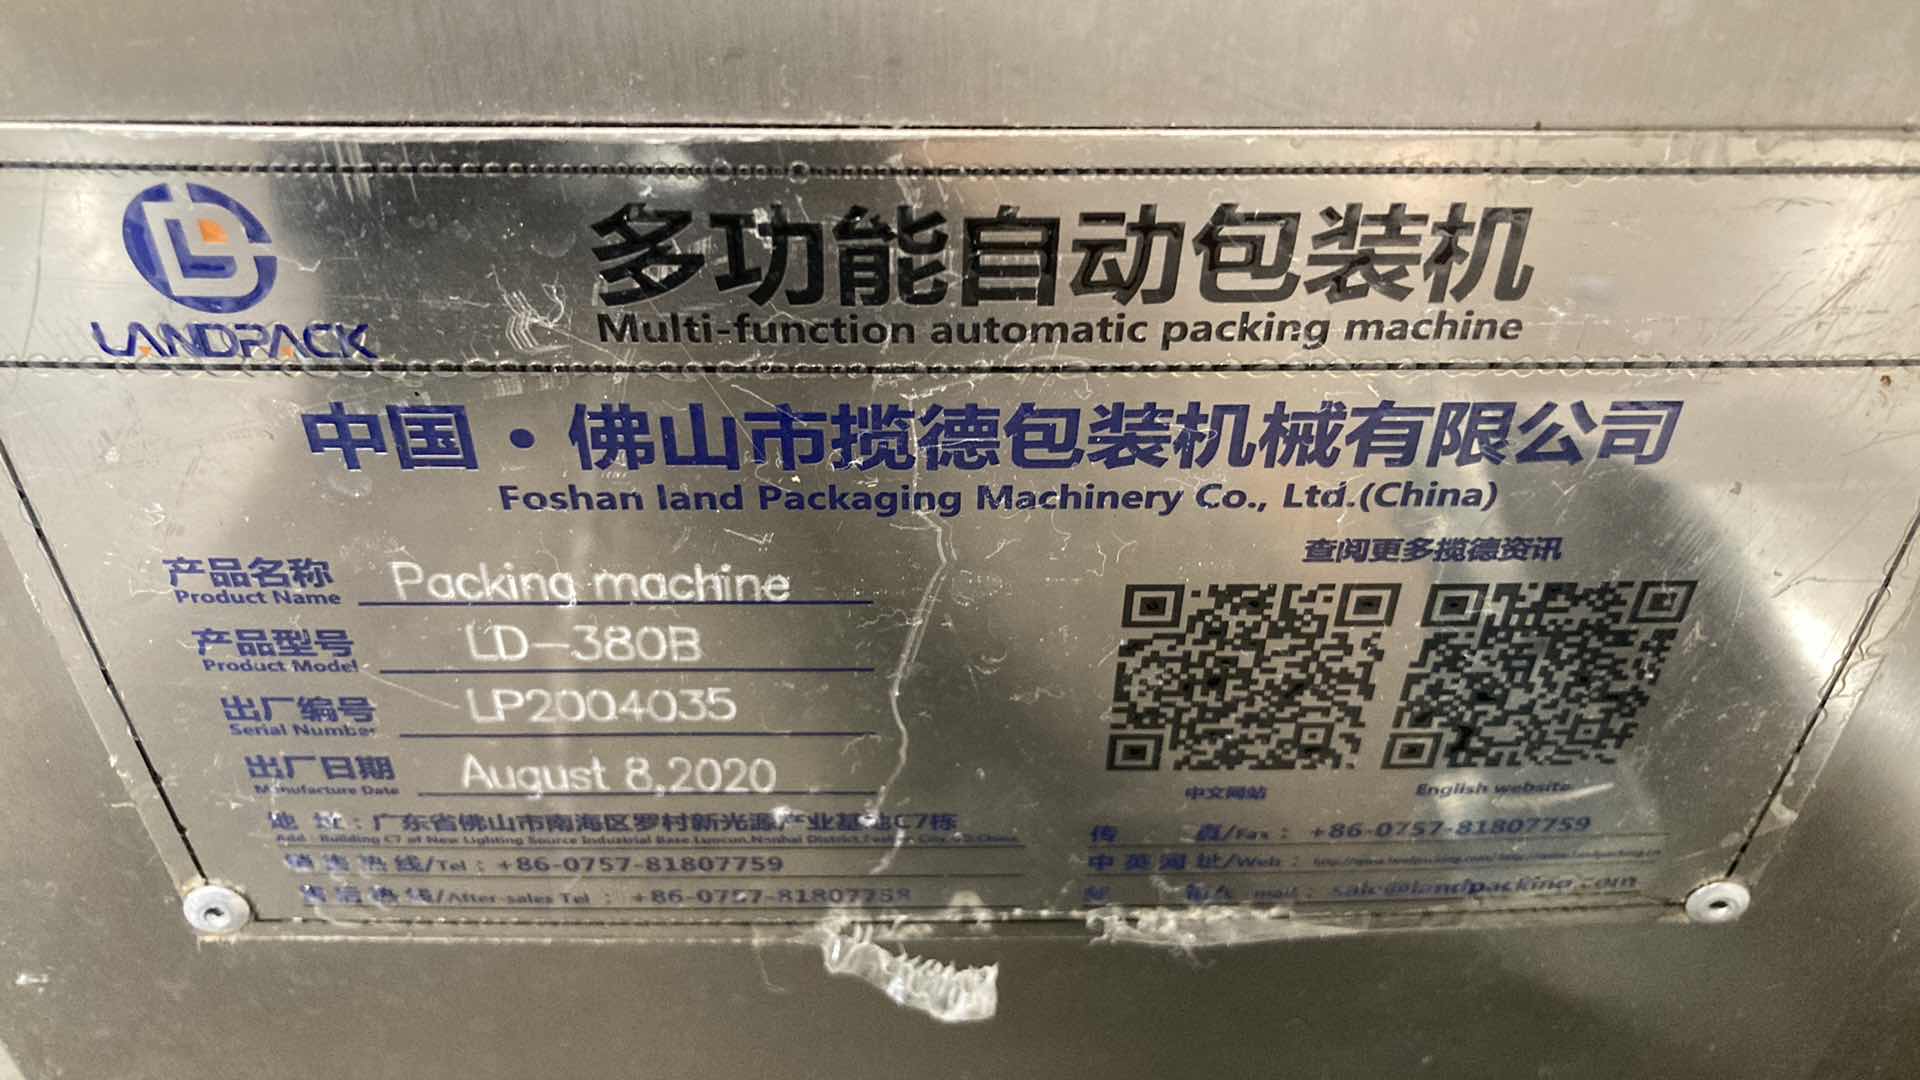 Photo 12 of LANDPACK COMMERCIAL AUTOMATIC POUCH PACKING MACHINE 240VOLT MODEL LD-380B